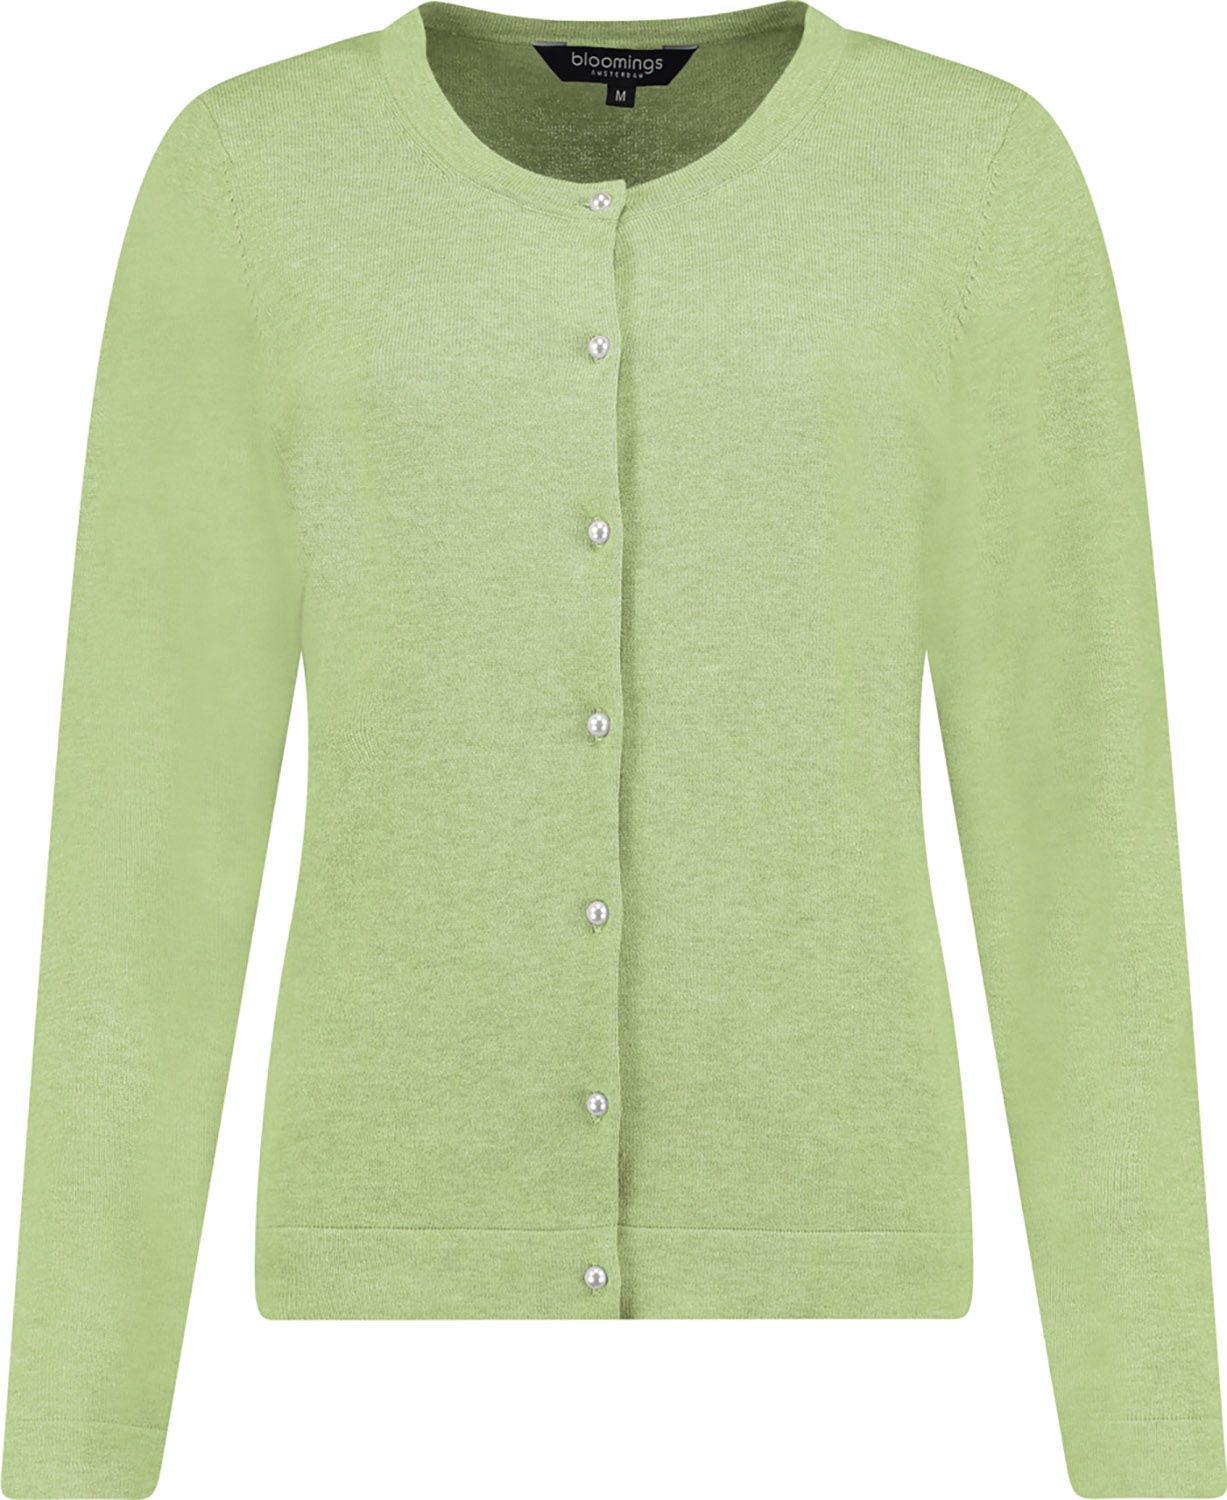 crew neck carsigan pearl button Groen